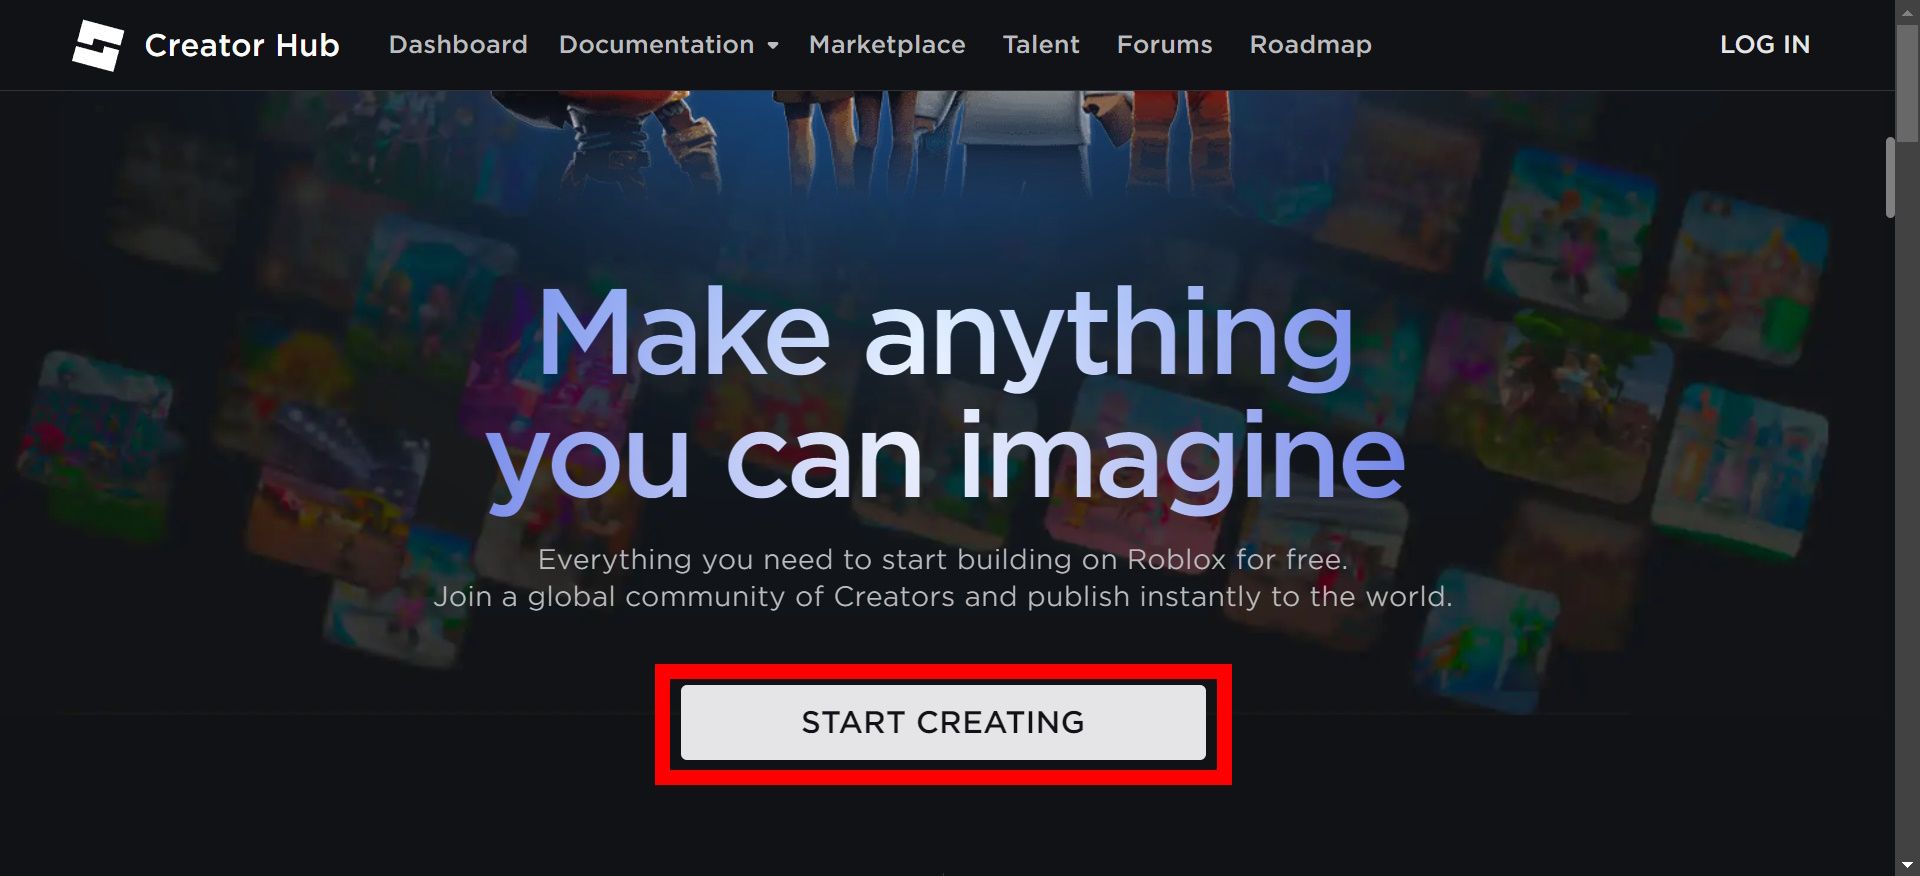 red rectangle outline over start creating button on roblox studio page